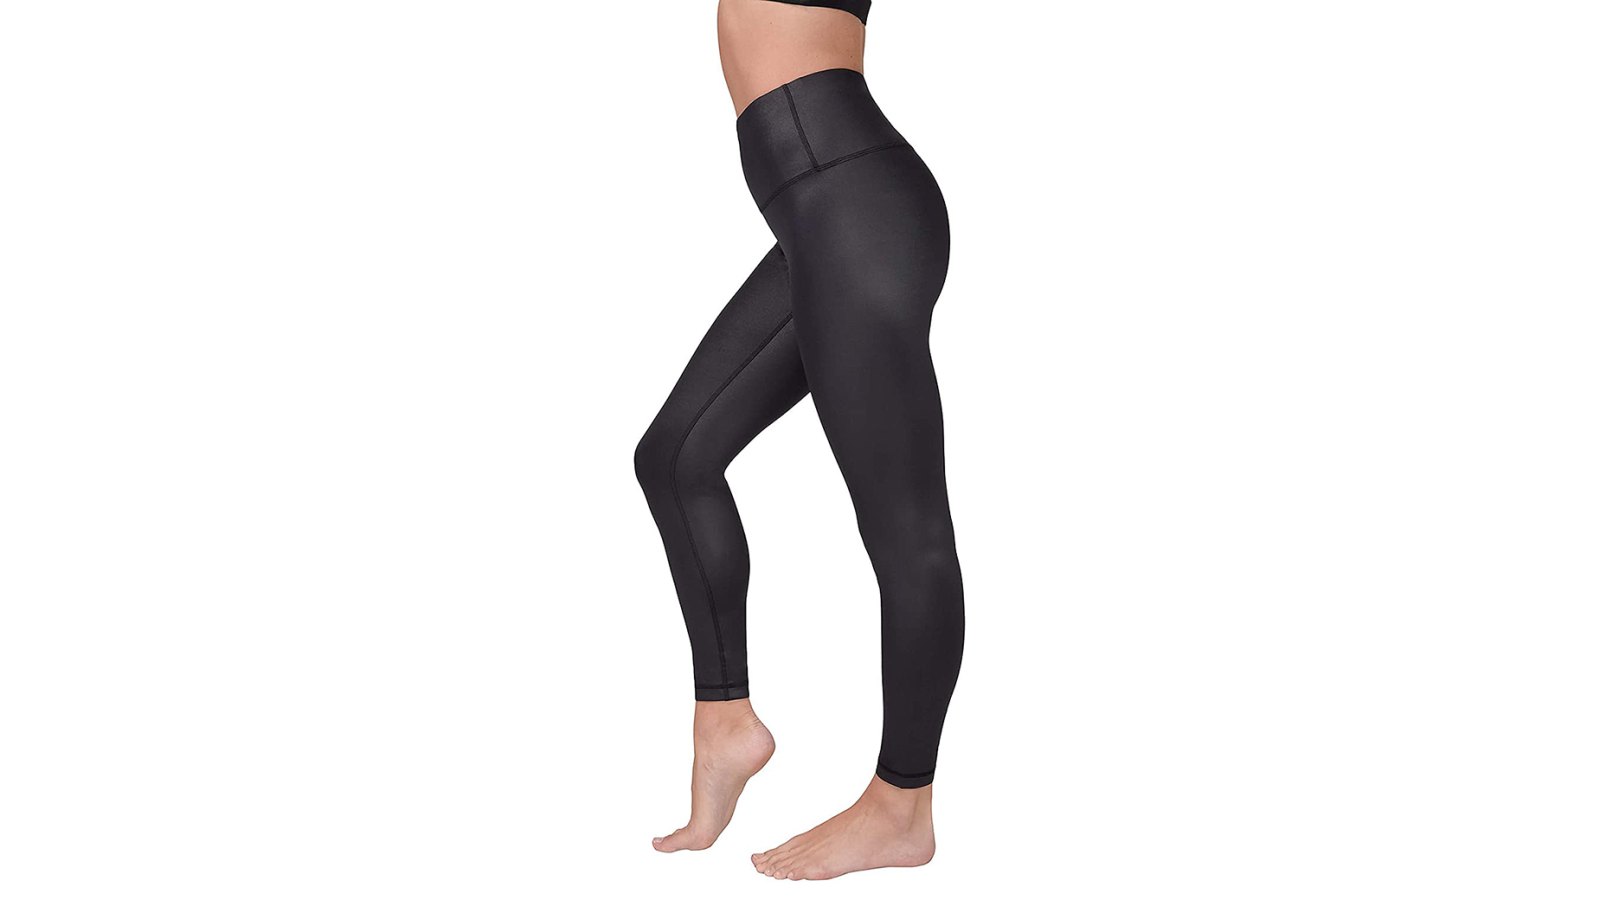 Interlink Cire High Waist Ankle Legging - AW79132 – 90 Degree by